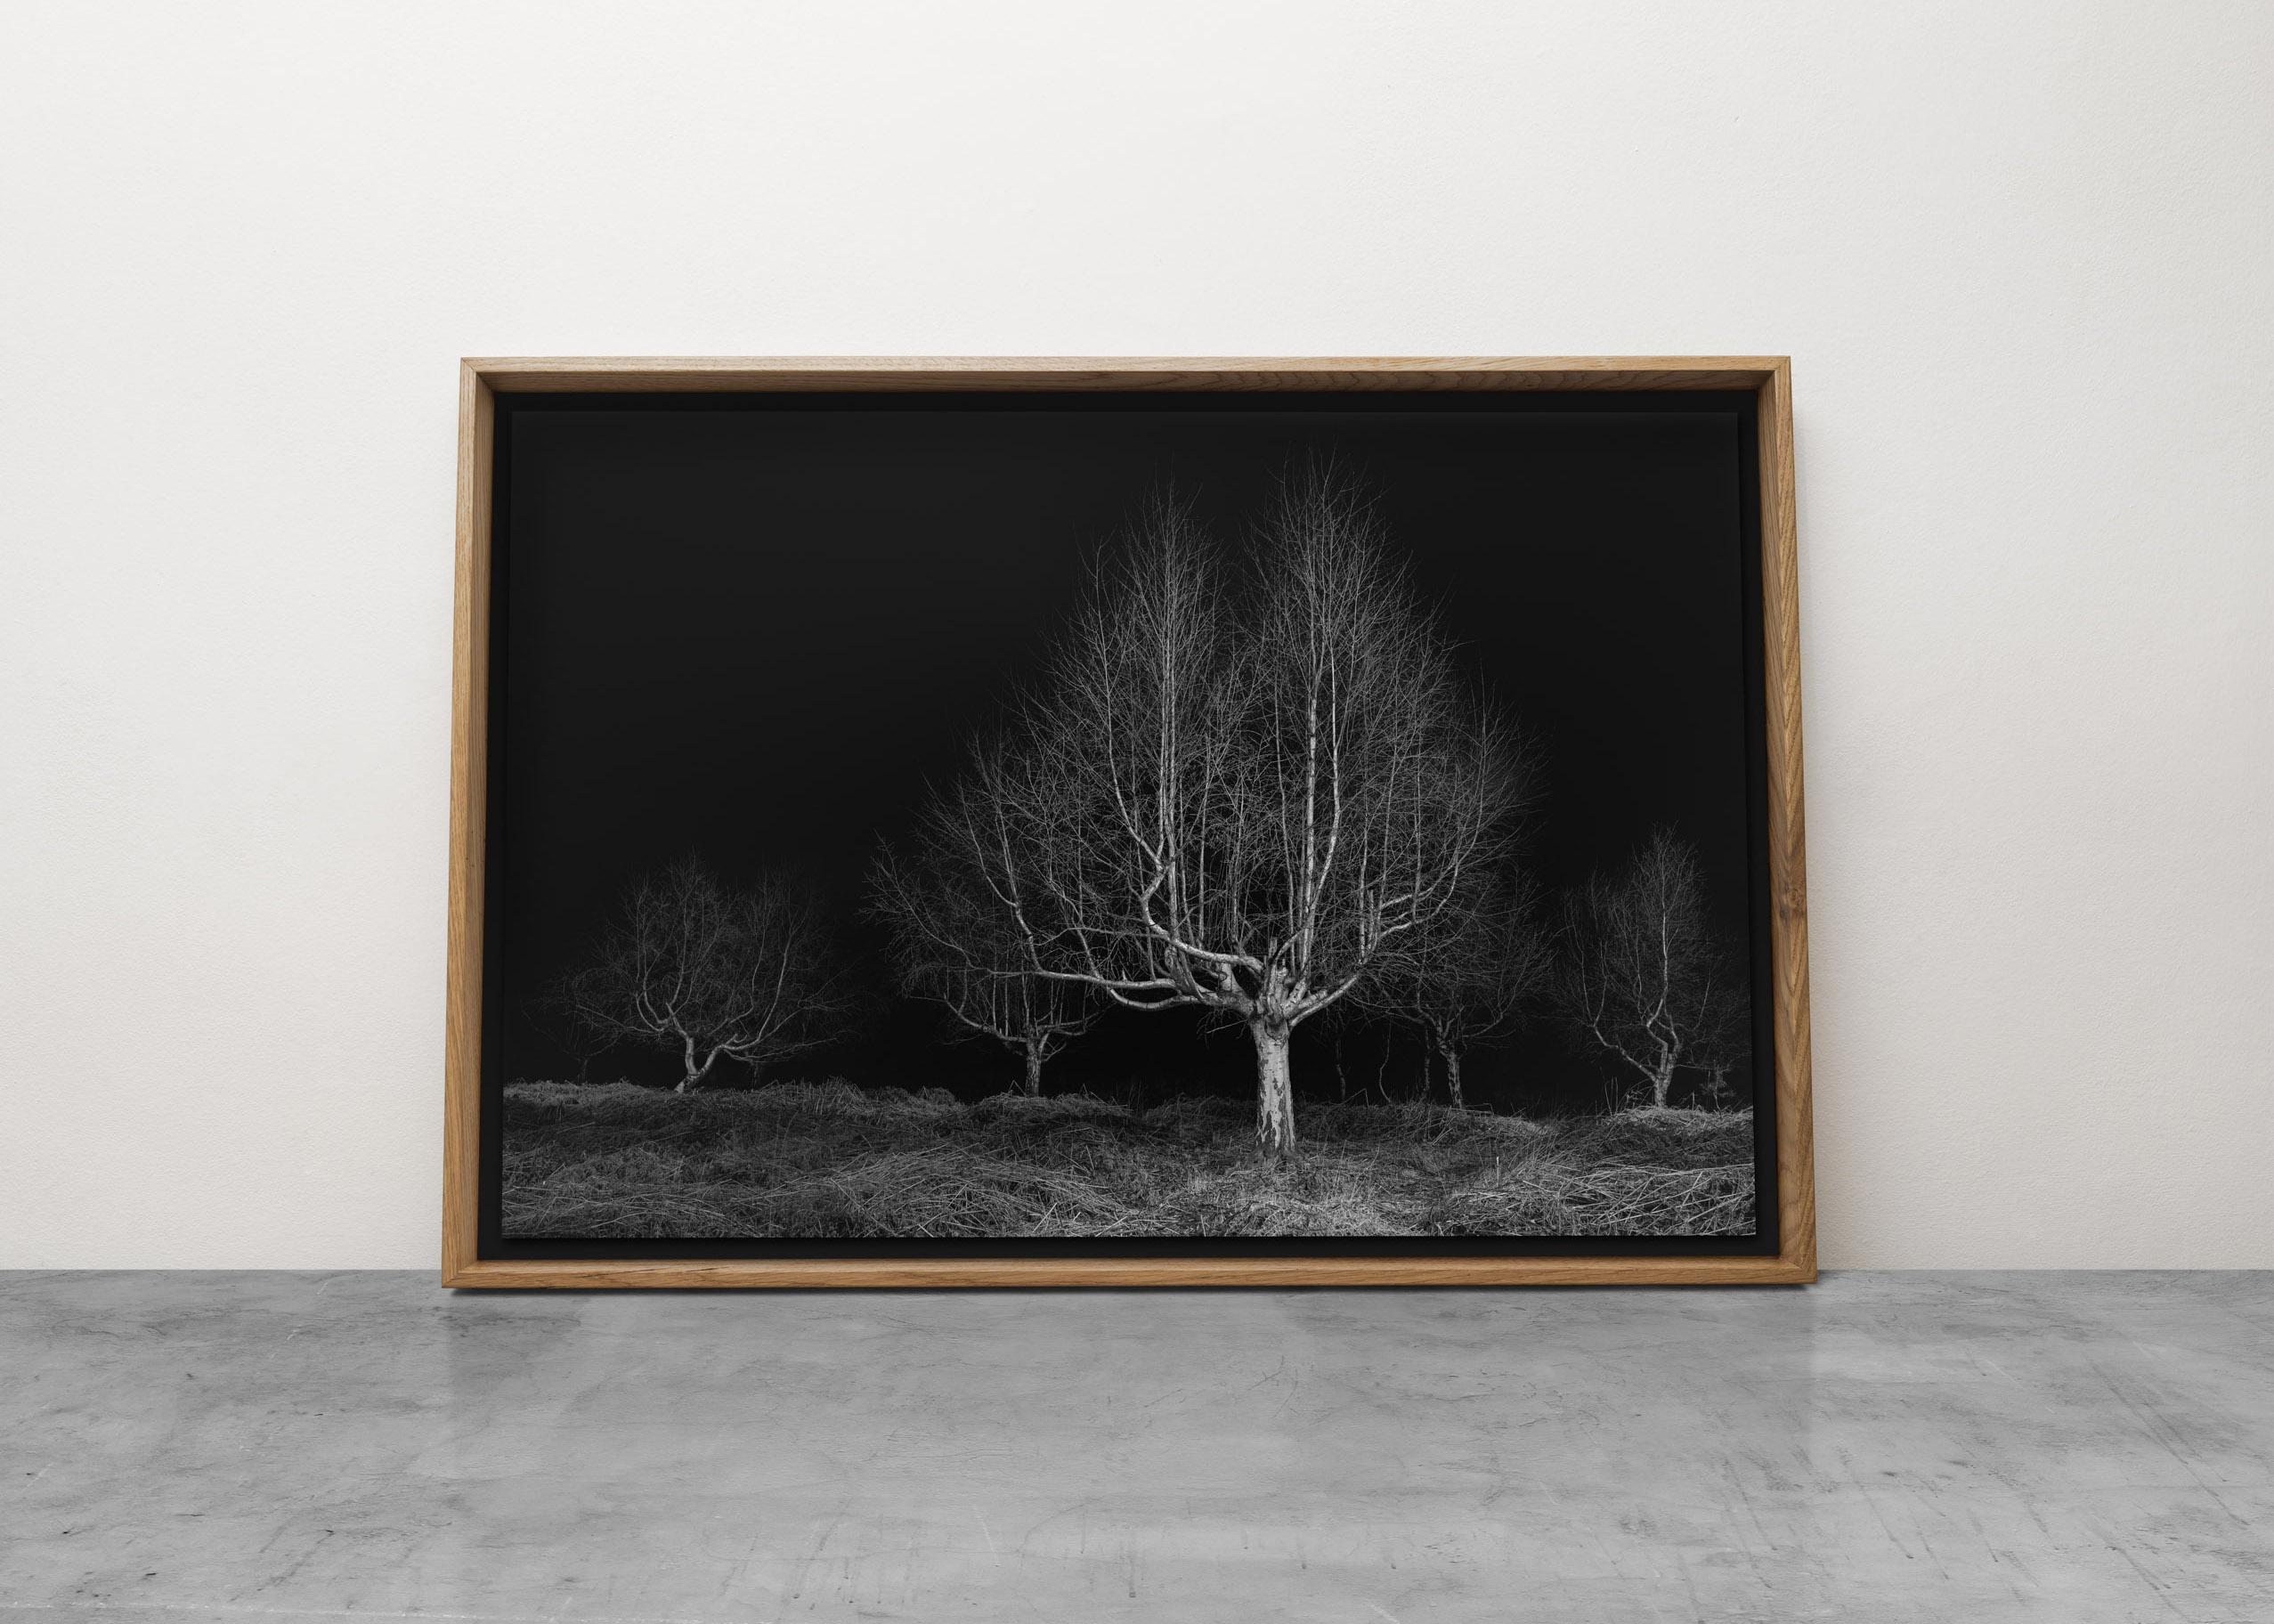 Twilight #19, Gathering - Silver Birch Tree - Black and White Landscape Print - Contemporary Photograph by Jasper Goodall